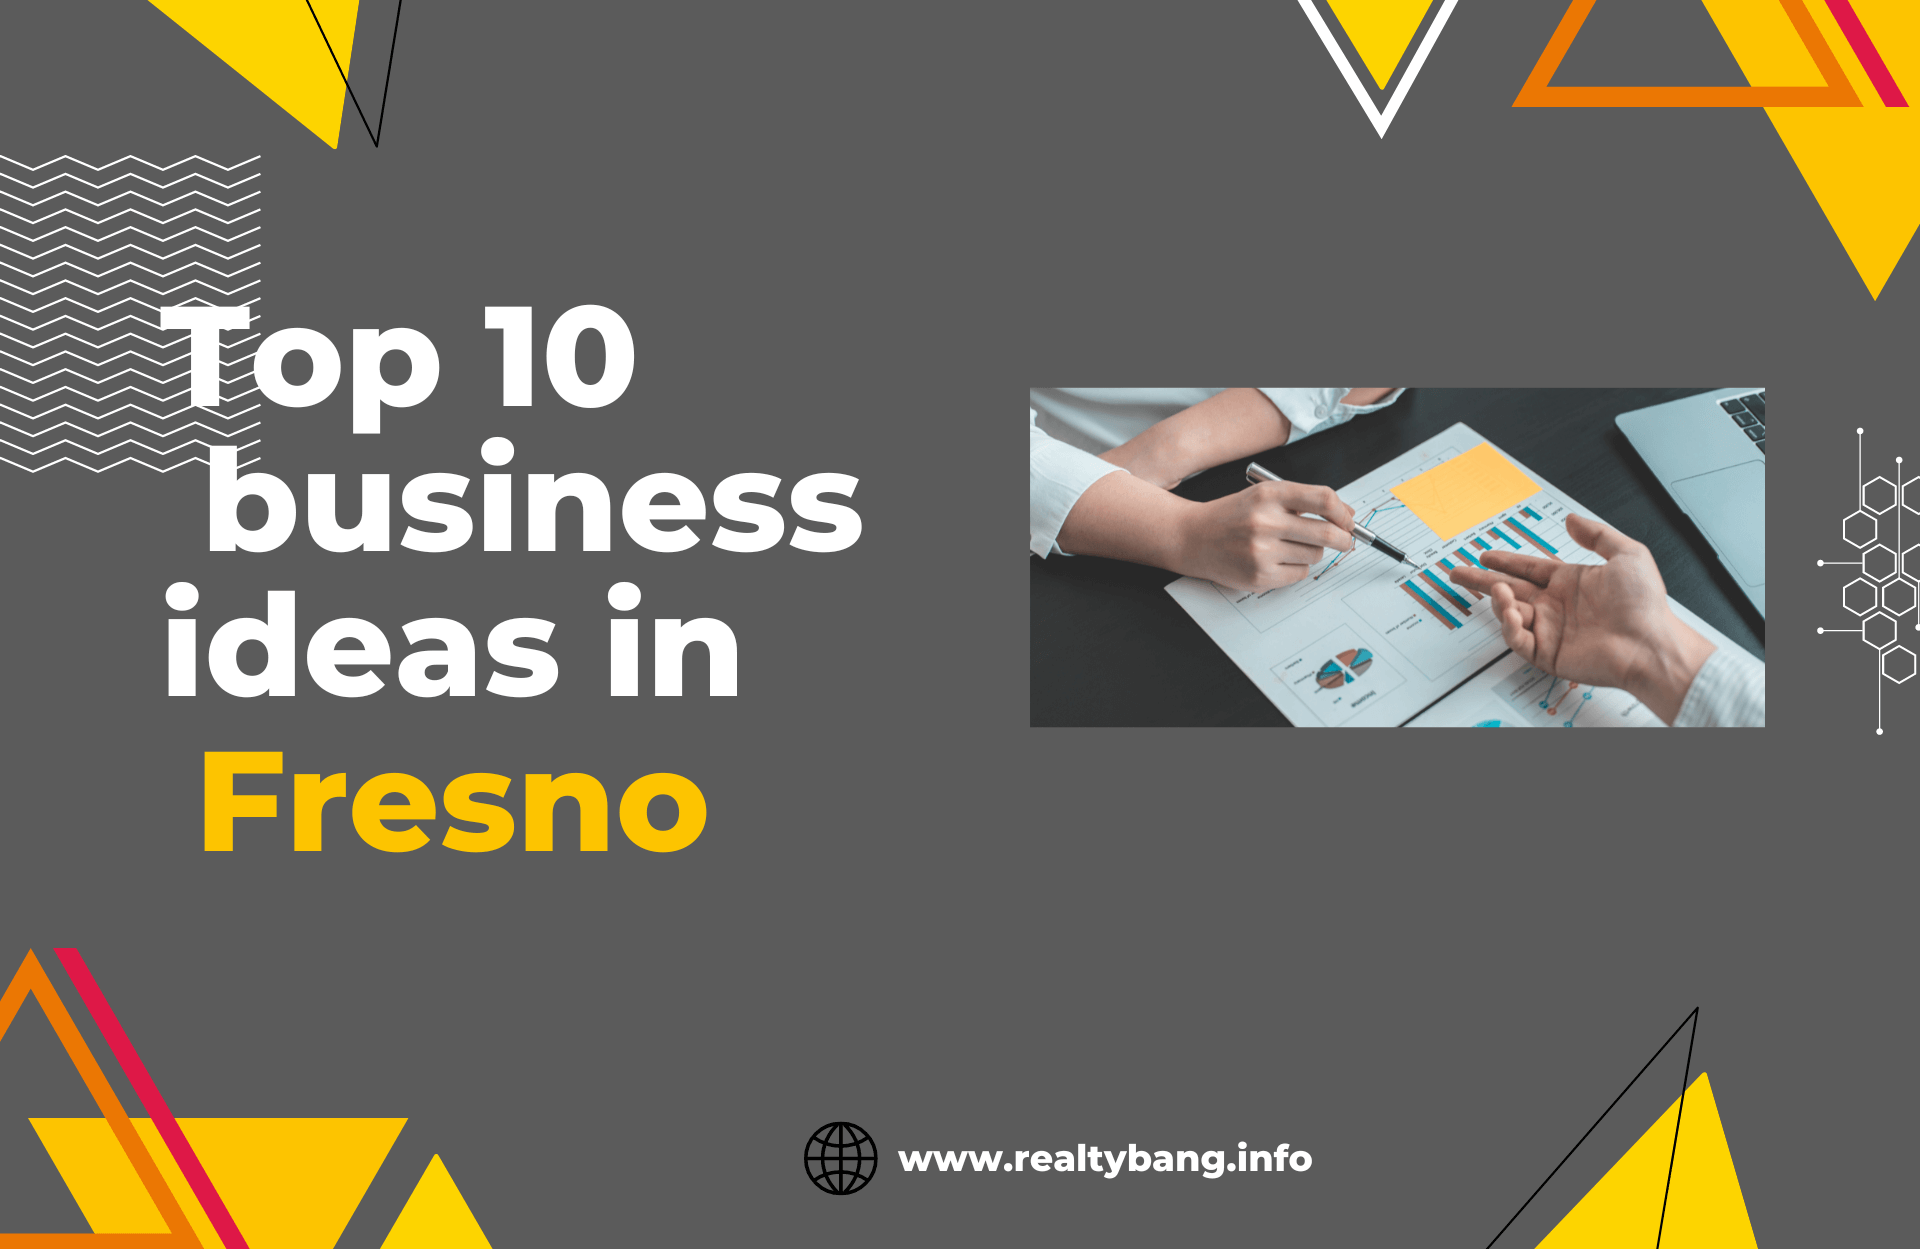 TOP 10 BUSINESS IDEAS IN FRESNO